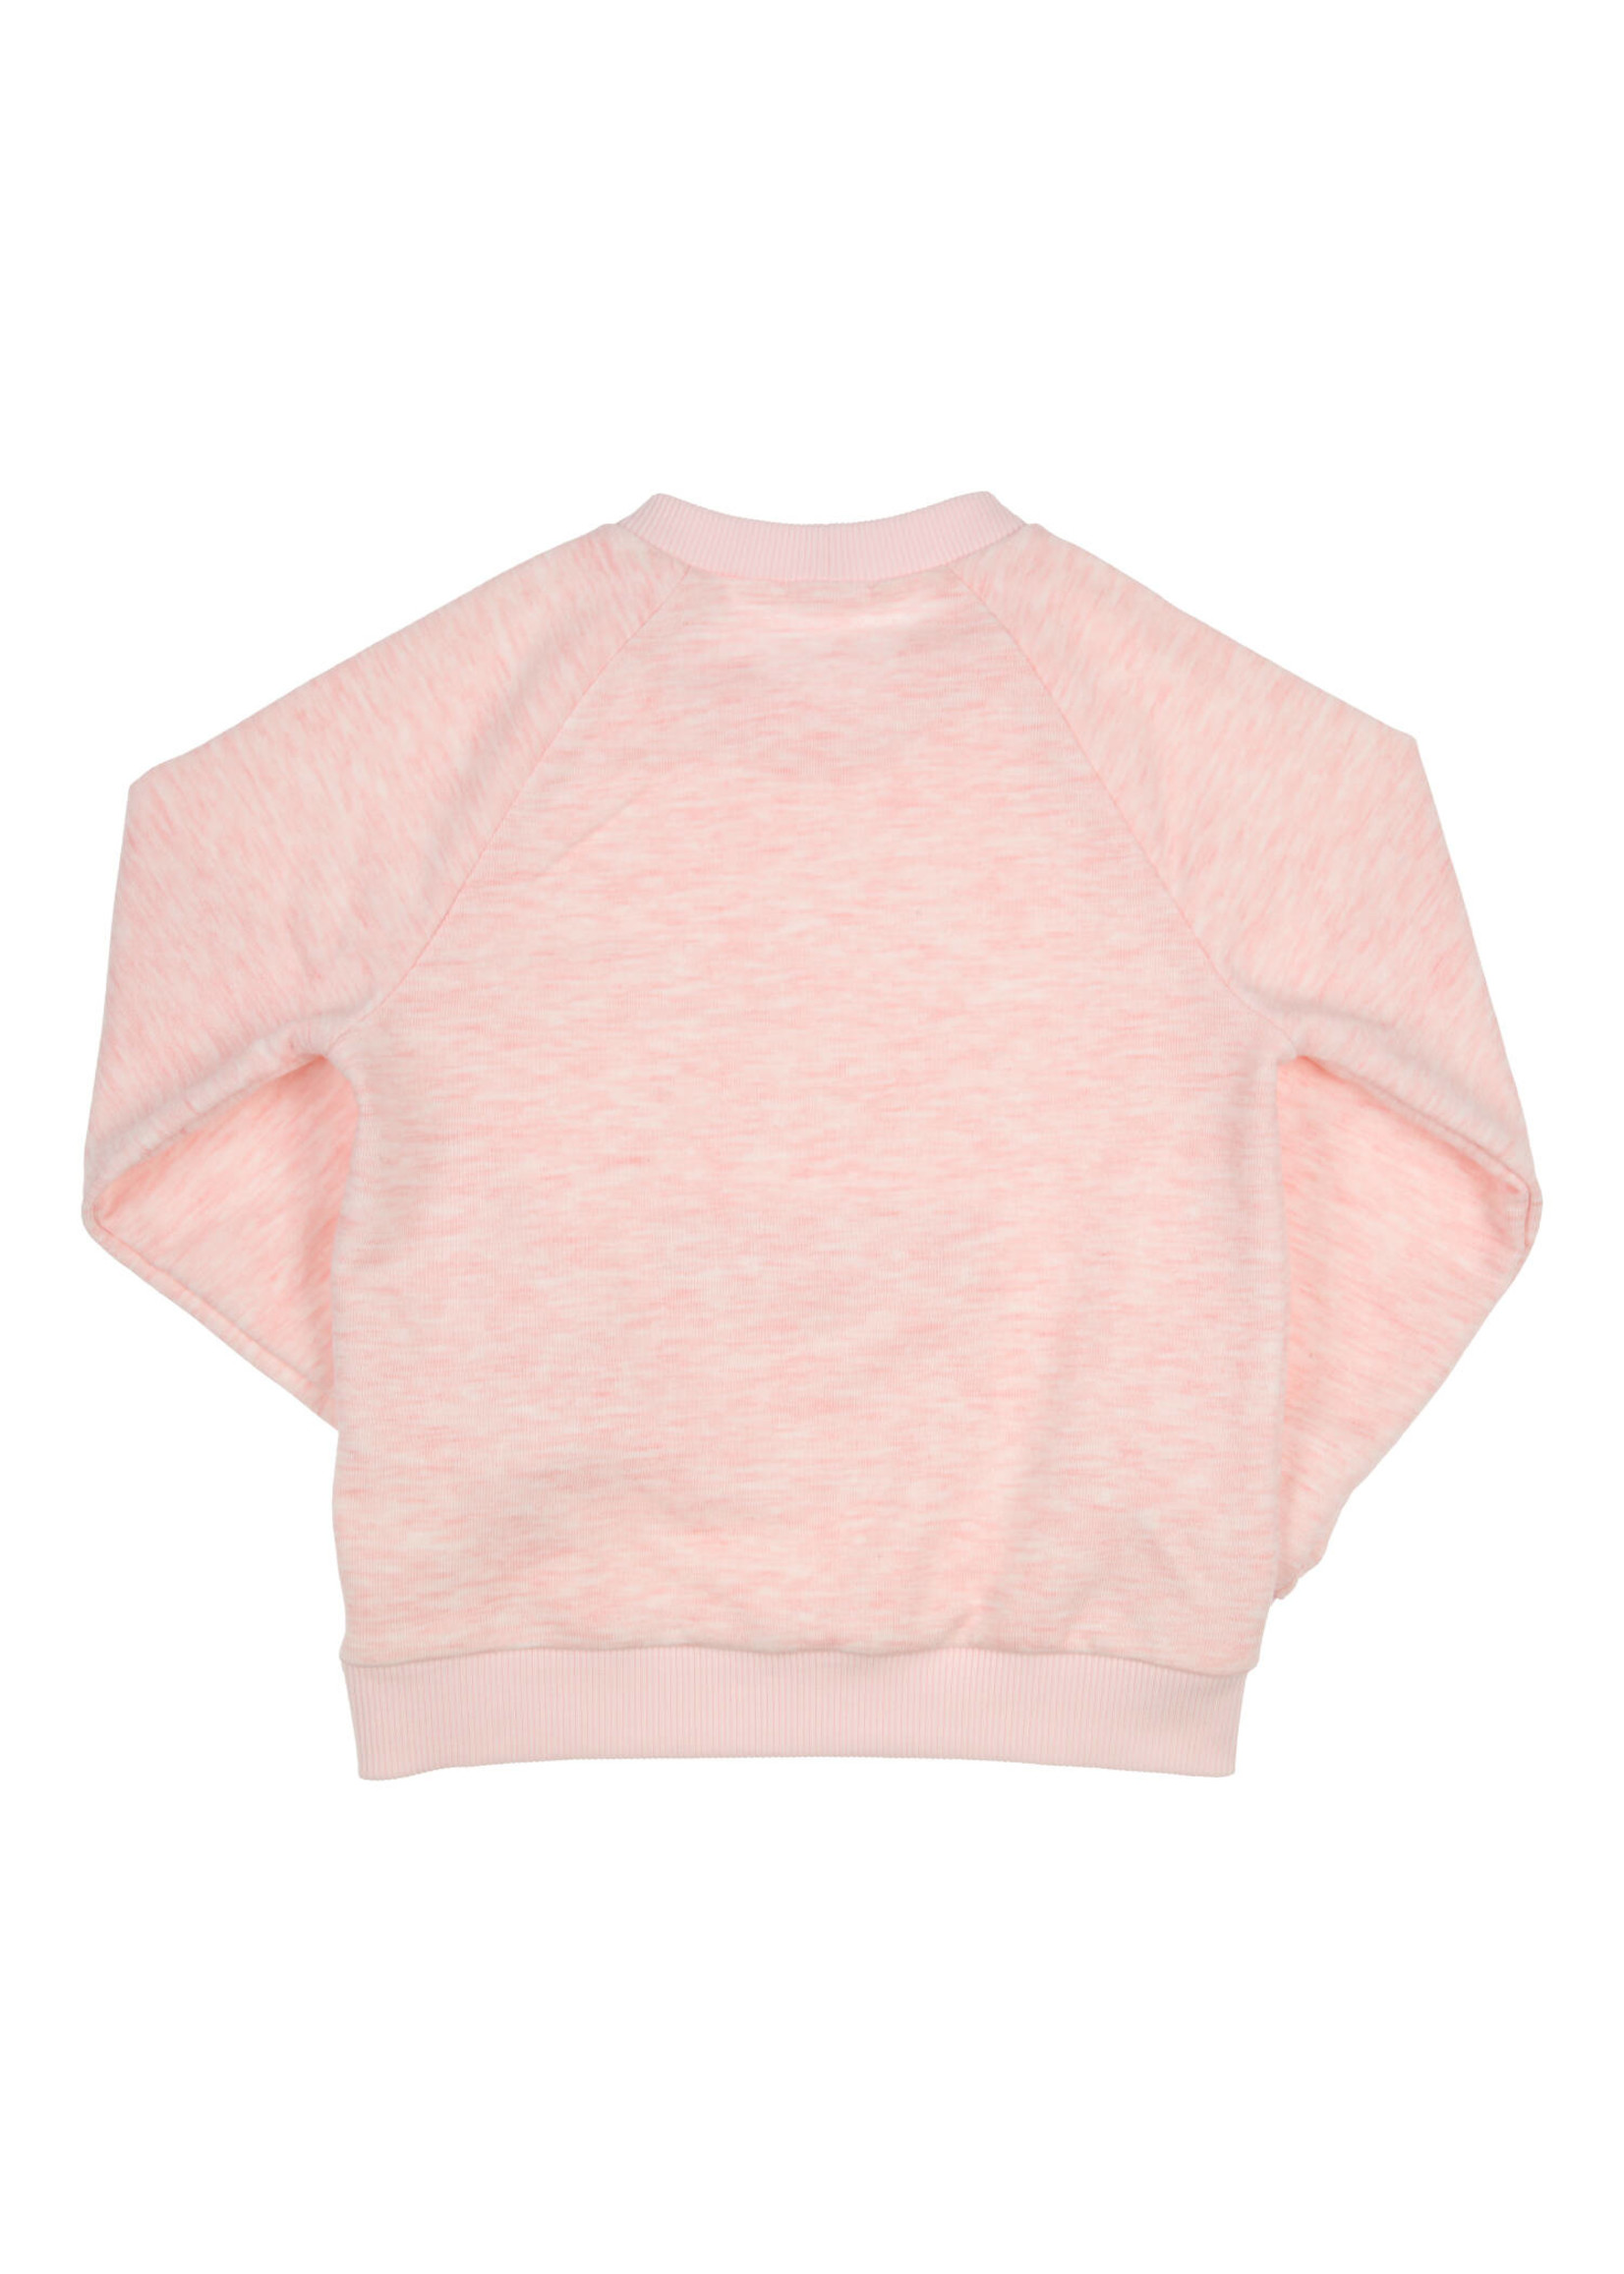 Gymp Sweater Jolie Old Rose 352-3197-10